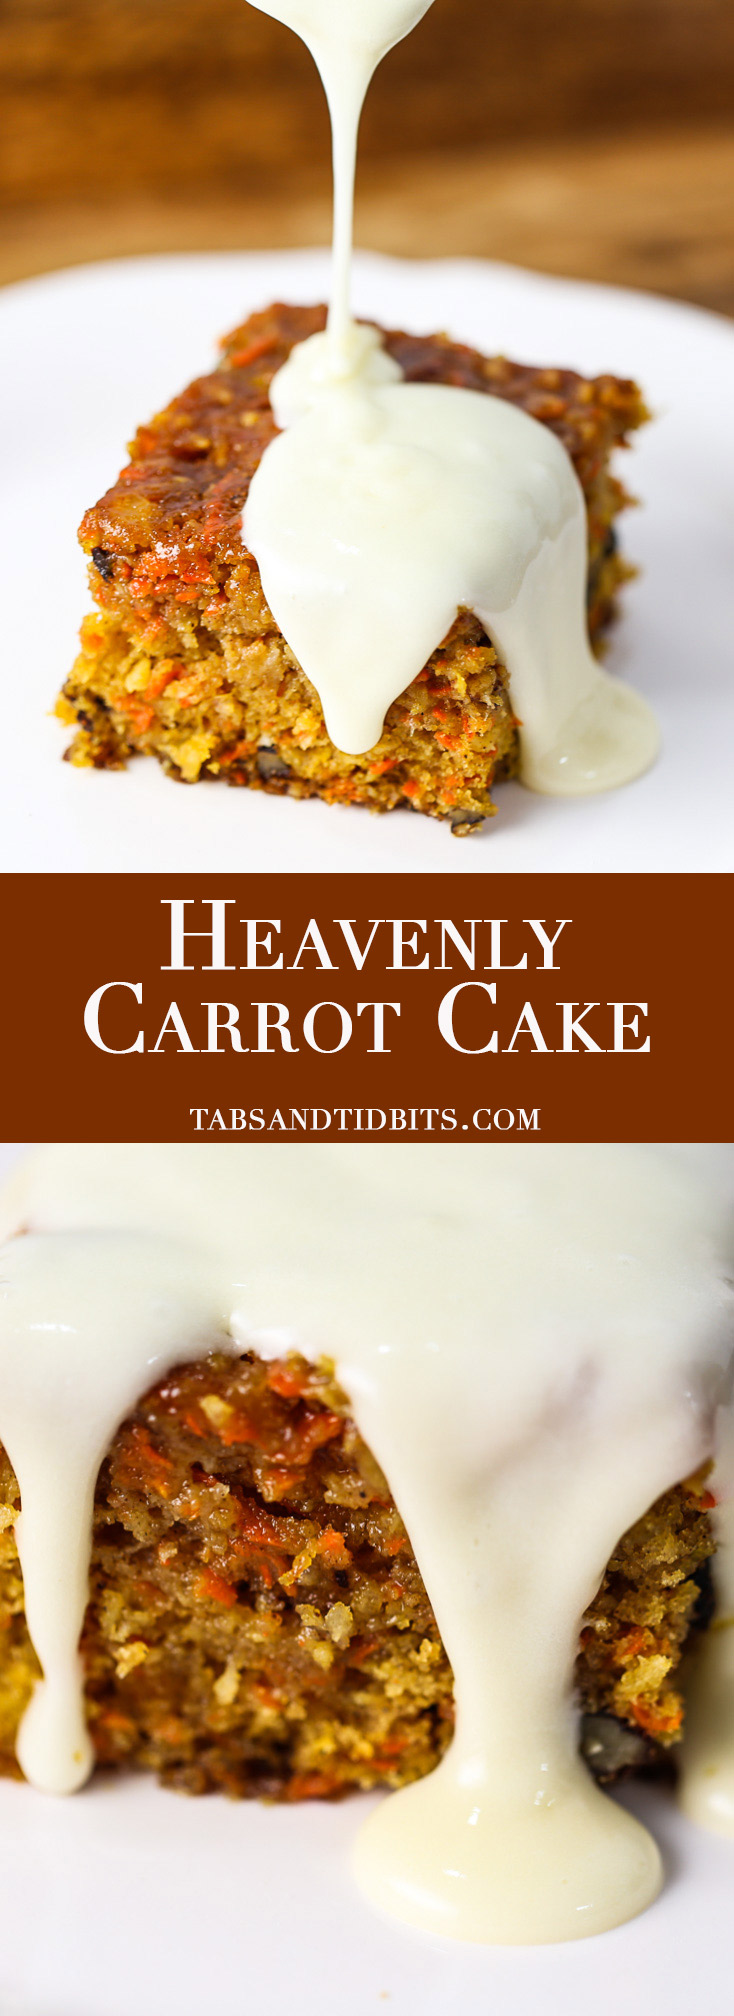 Heavenly Carrot Cake - A rich and moist carrot cake served warm with simple syrup and warm cream cheese frosting!